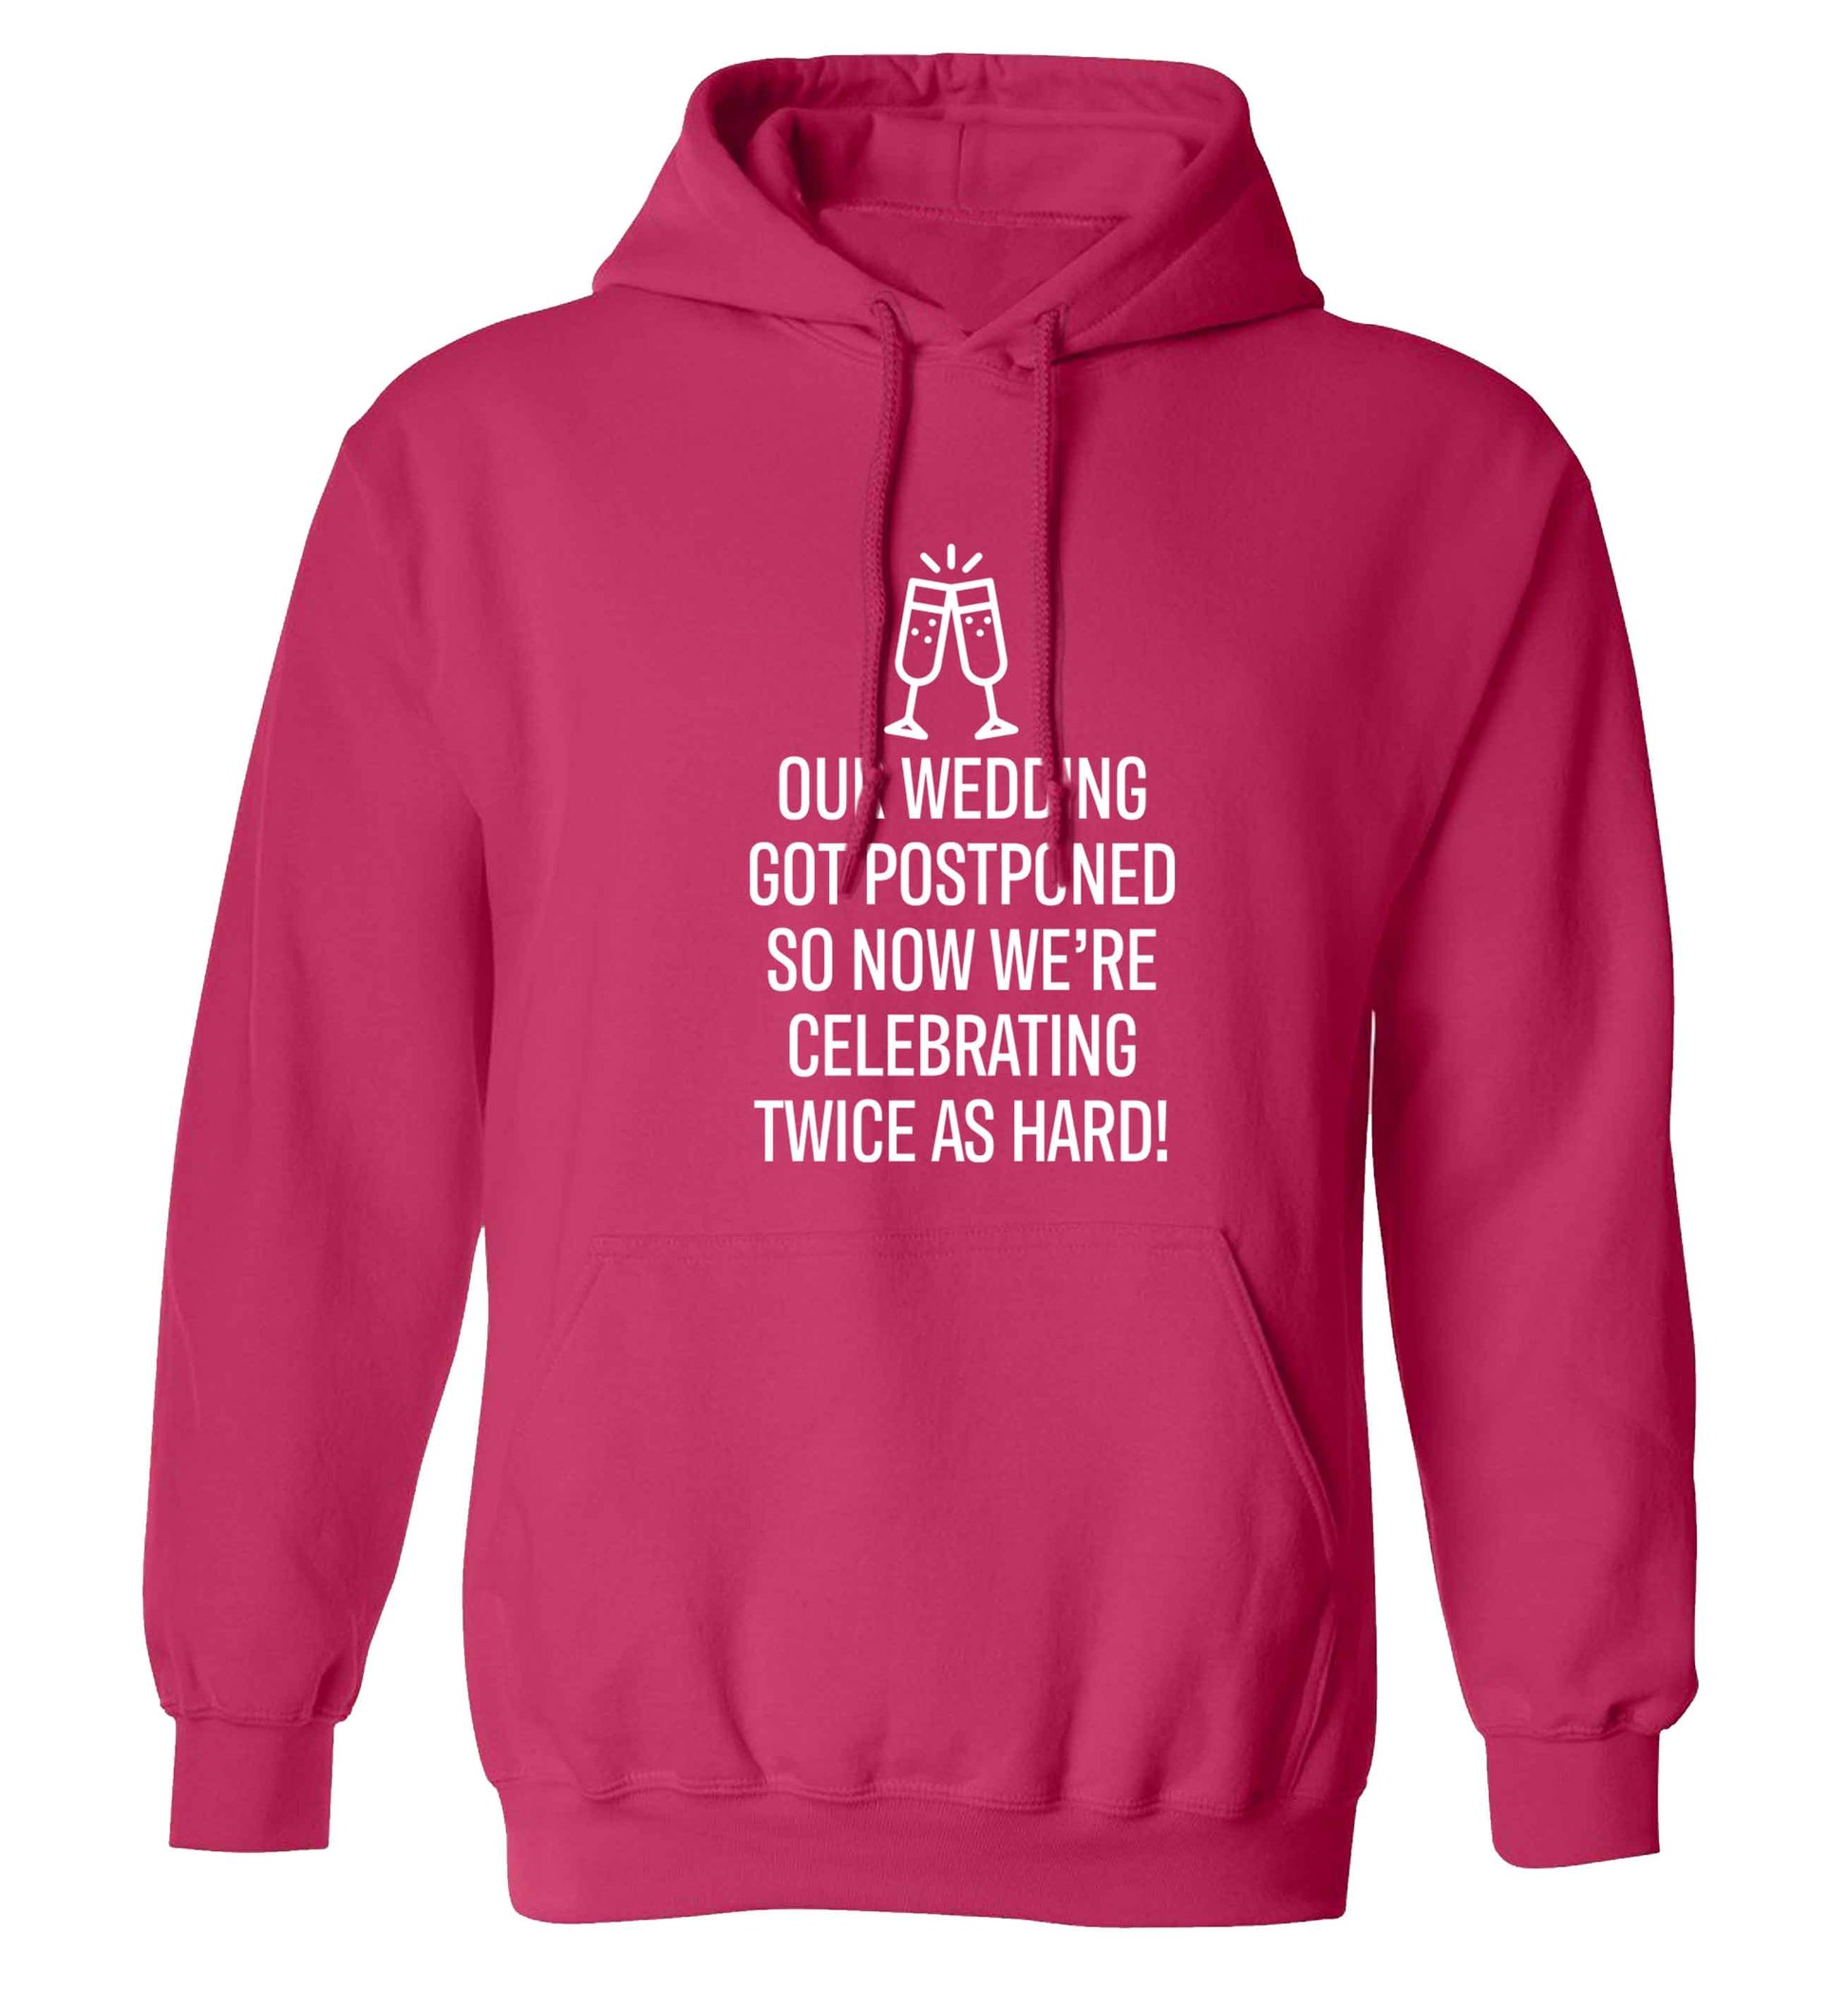 Postponed wedding? Sounds like an excuse to party twice as hard!  adults unisex pink hoodie 2XL